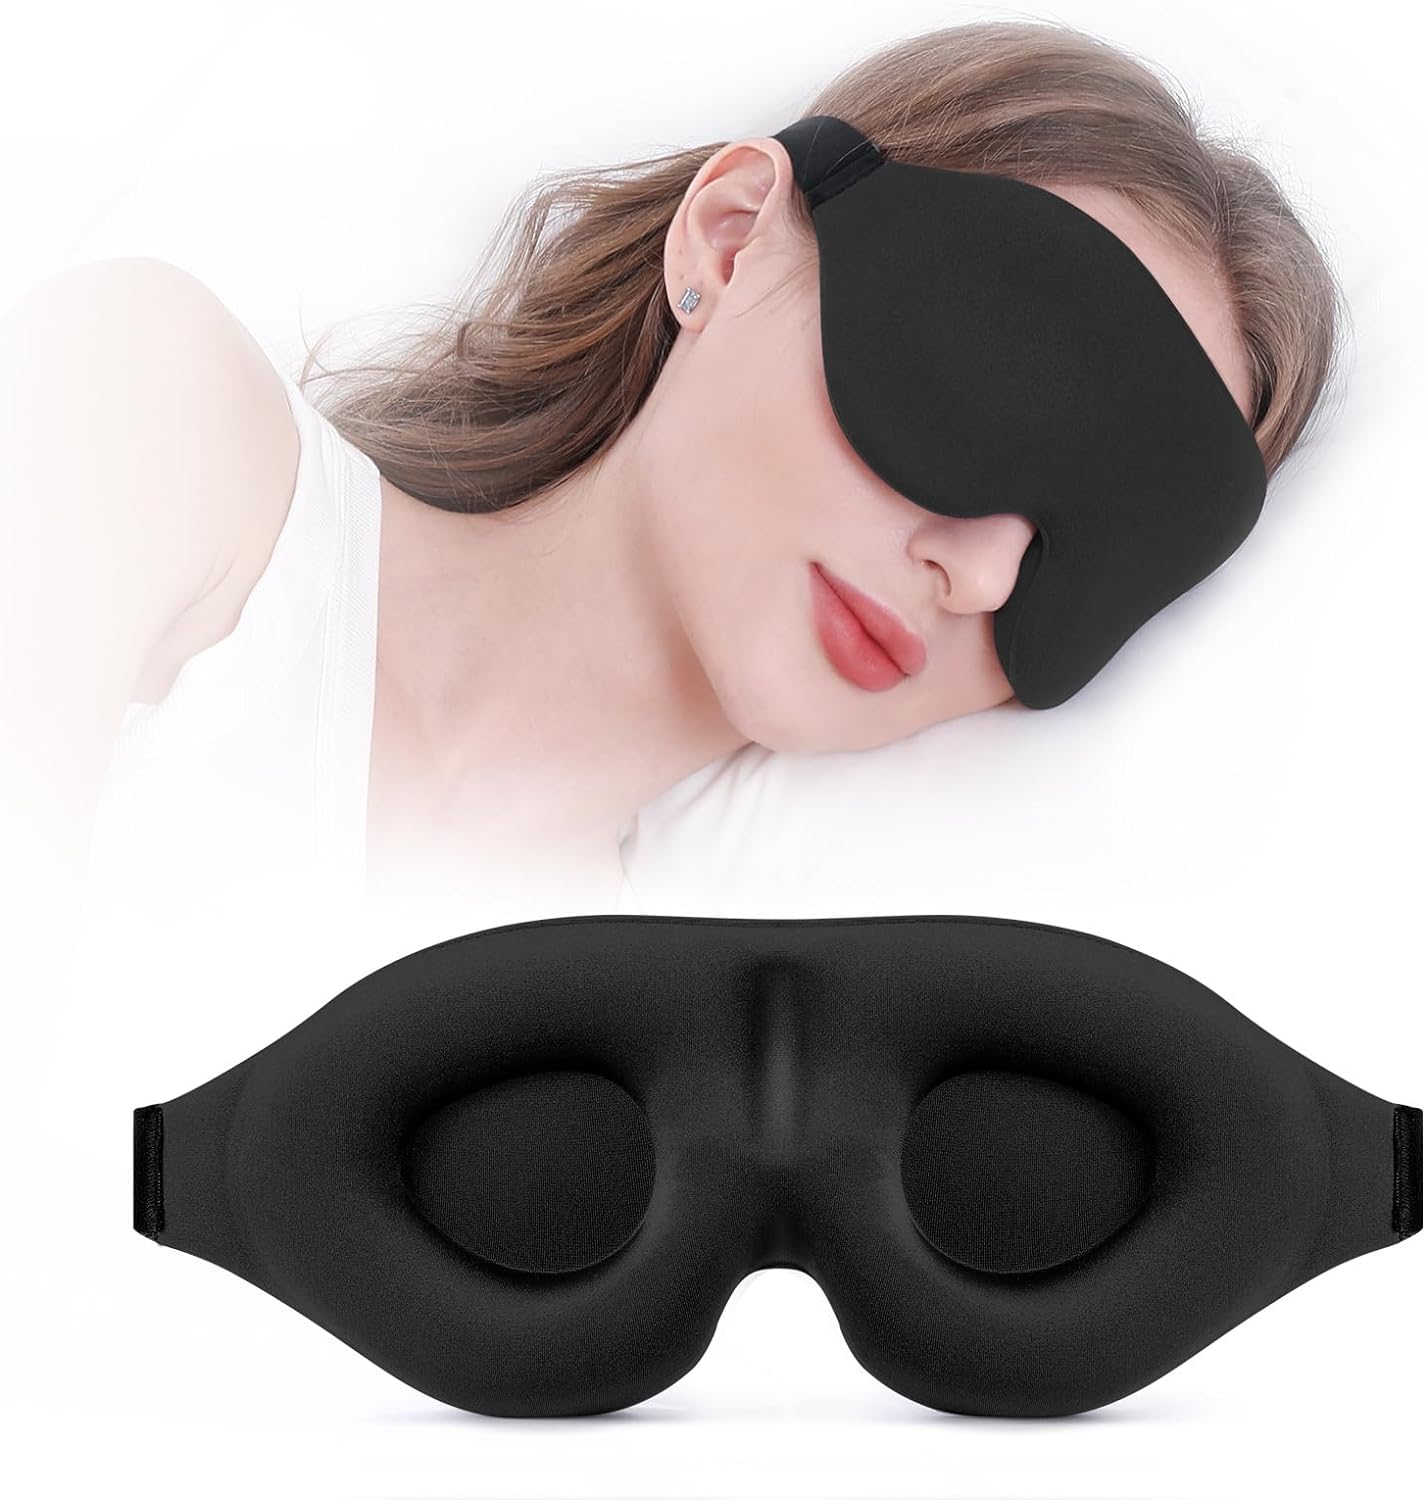 This eye mask works so well! Im super sensitive to light and I wake up at even the slightest amount if light. When I moved to a place that had a lot of natural sunlight, I was unable to sleep once the sun came up, even with the blinds closed. I tried so many different eye masks but this one beats them all. I sleep EXTREMELY well with this. Its perfect at keeping all light out, so much so it makes it hard for me to wake up sometimes. Its super comfy and lightweight. Im so happy I purchased th